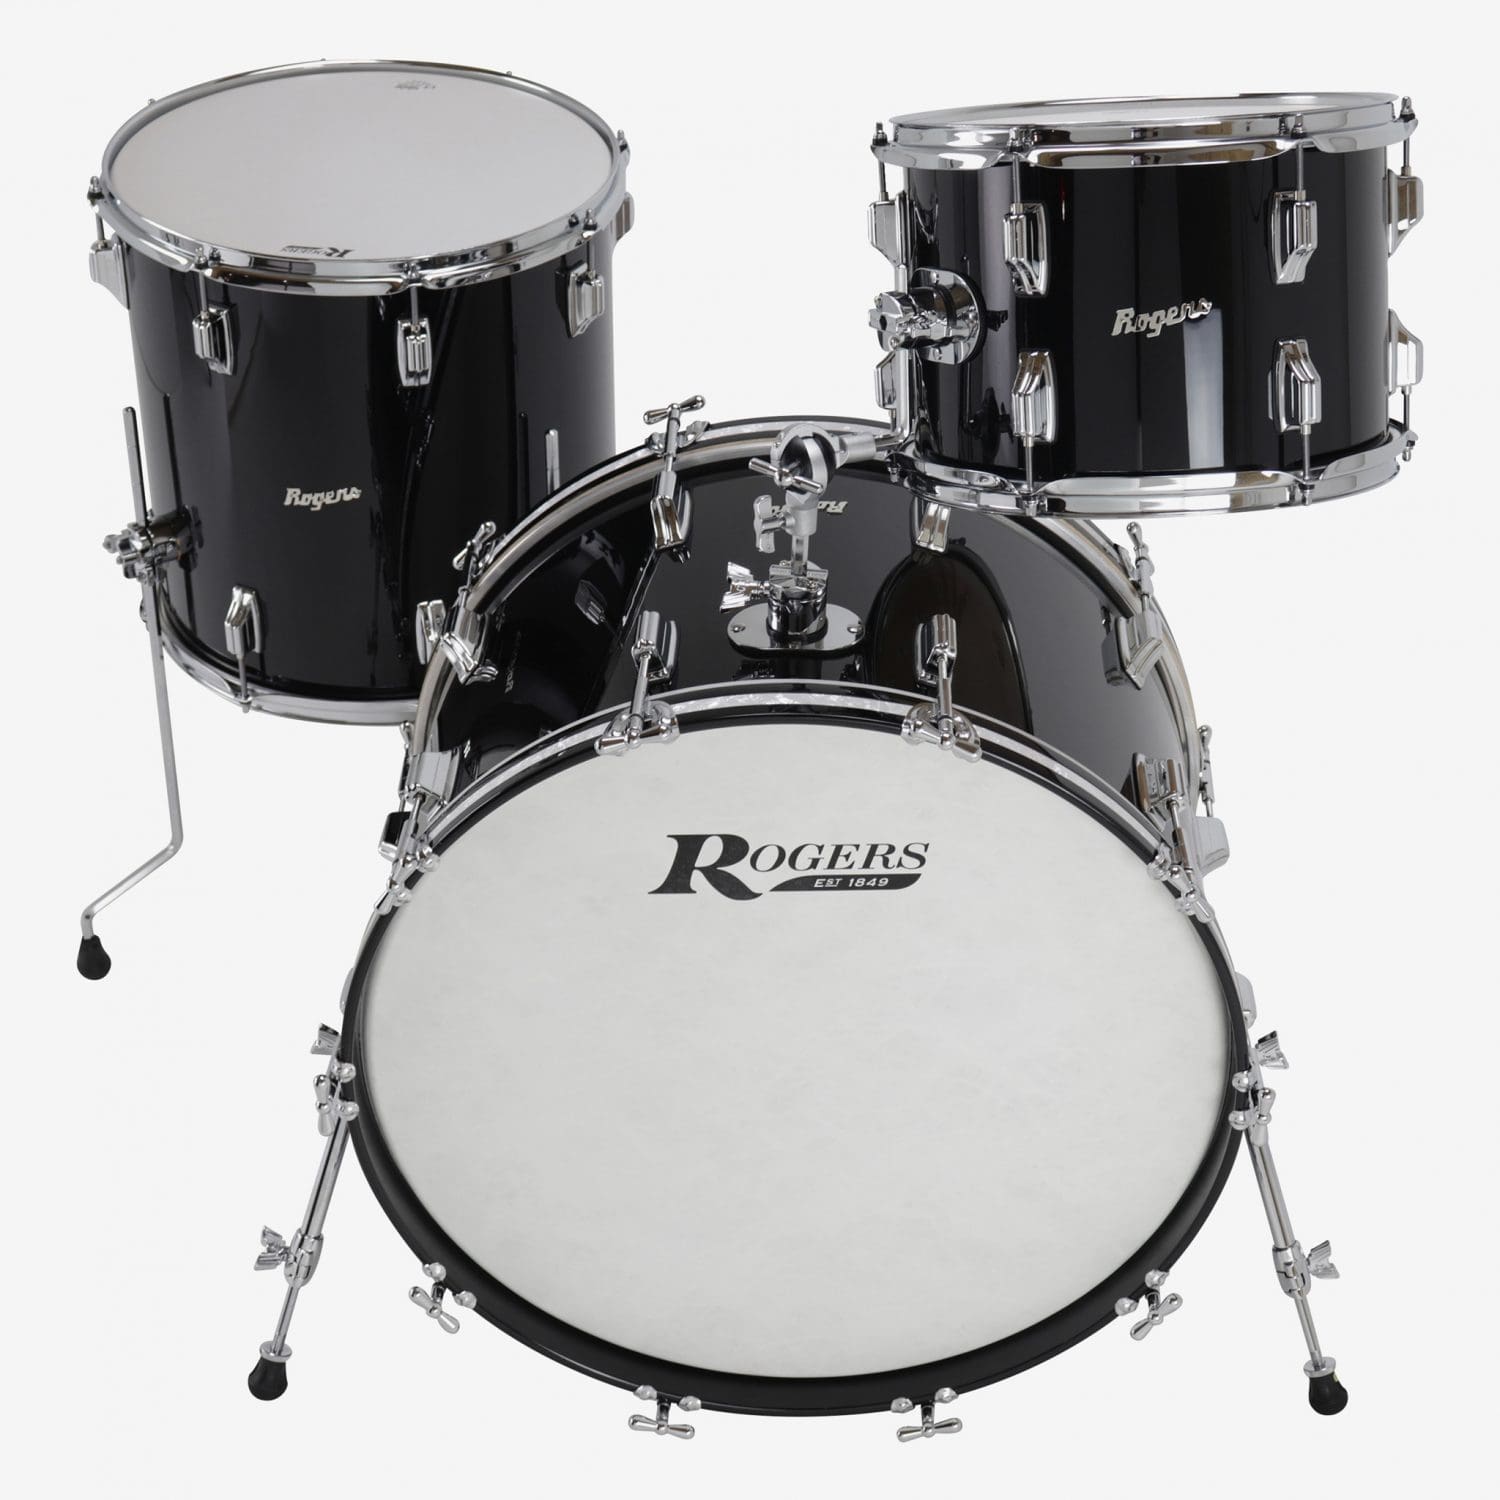 Piano Black Lacquer PowerTone 3-Piece Shell Pack